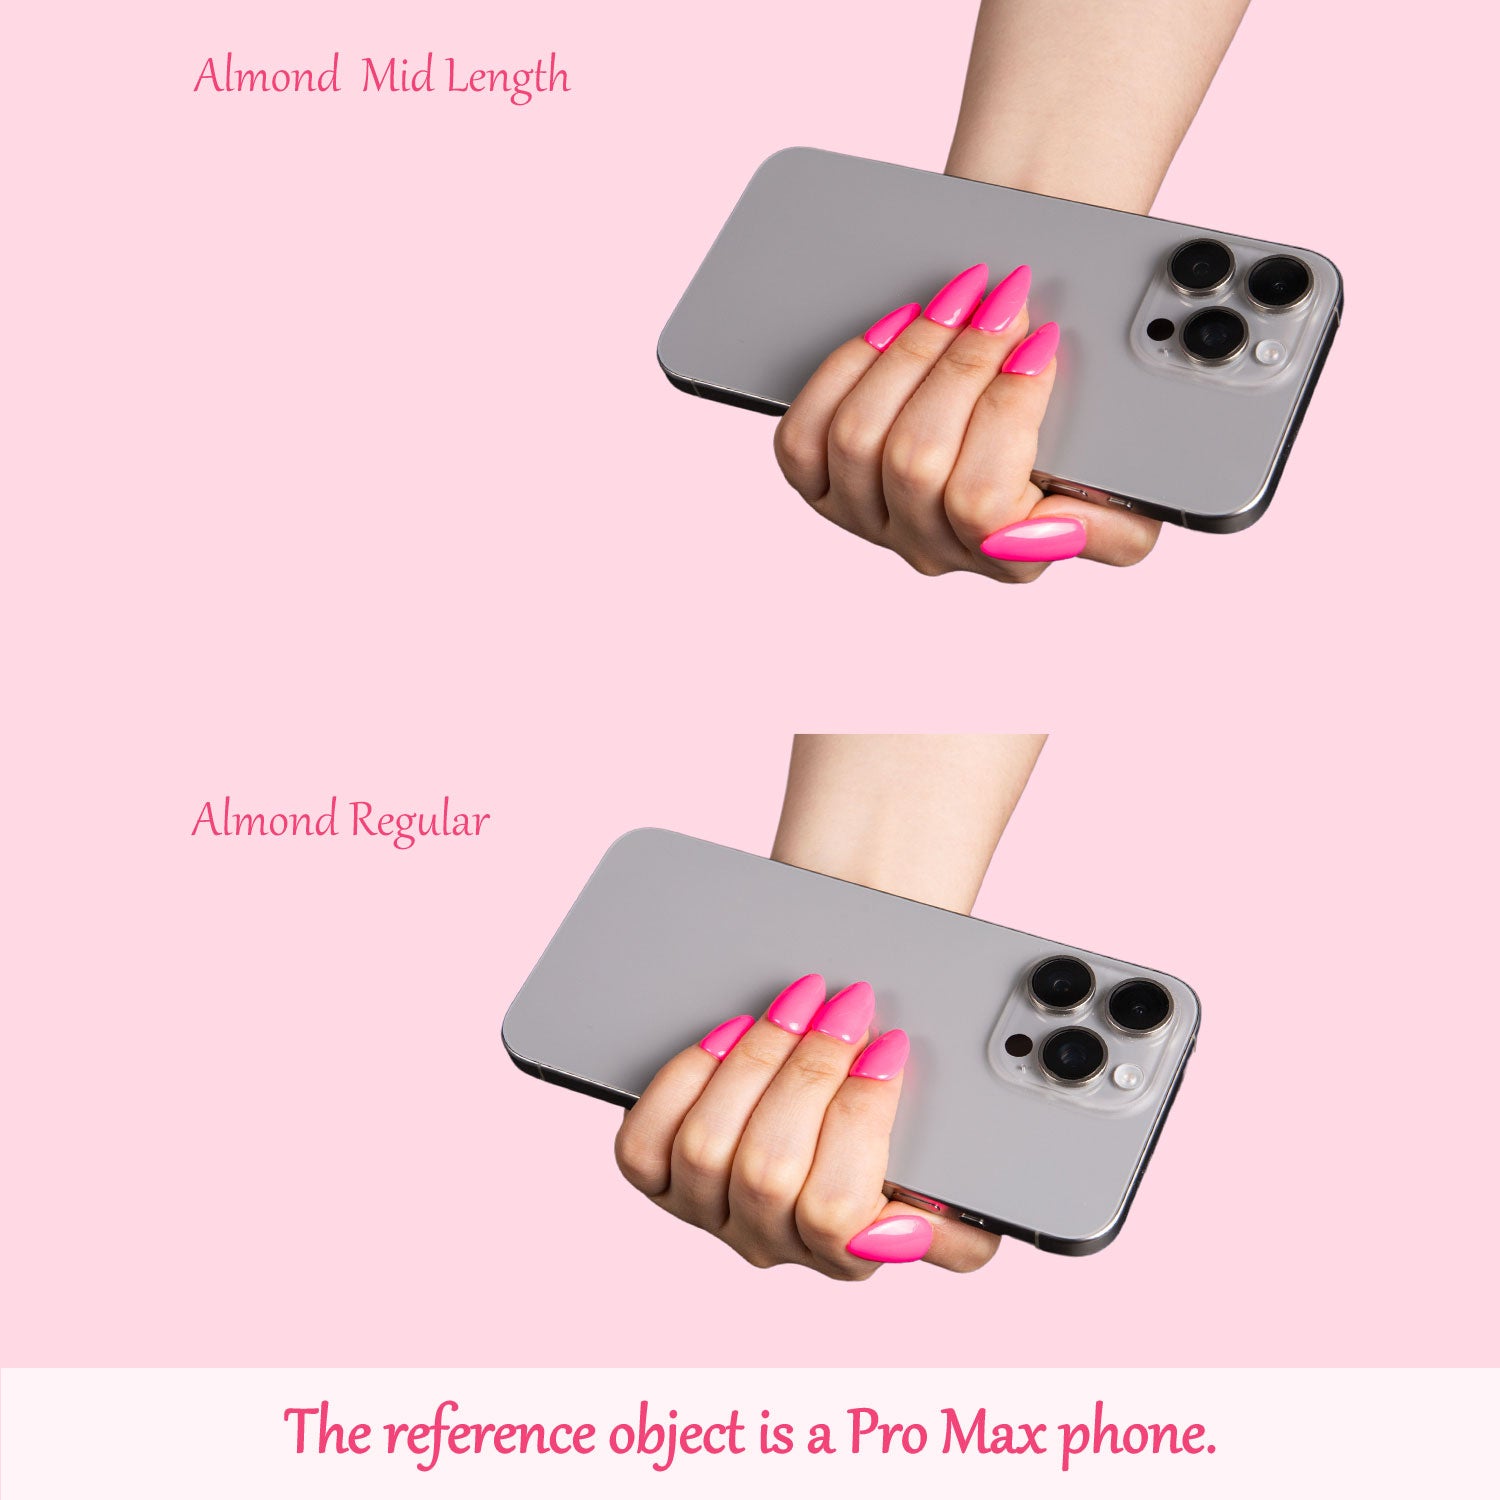 Comparison of Lovful's Almond Mid Length and Almond Regular press-on nails. Both sets of nails are displayed on a hand holding a Pro Max phone for reference.